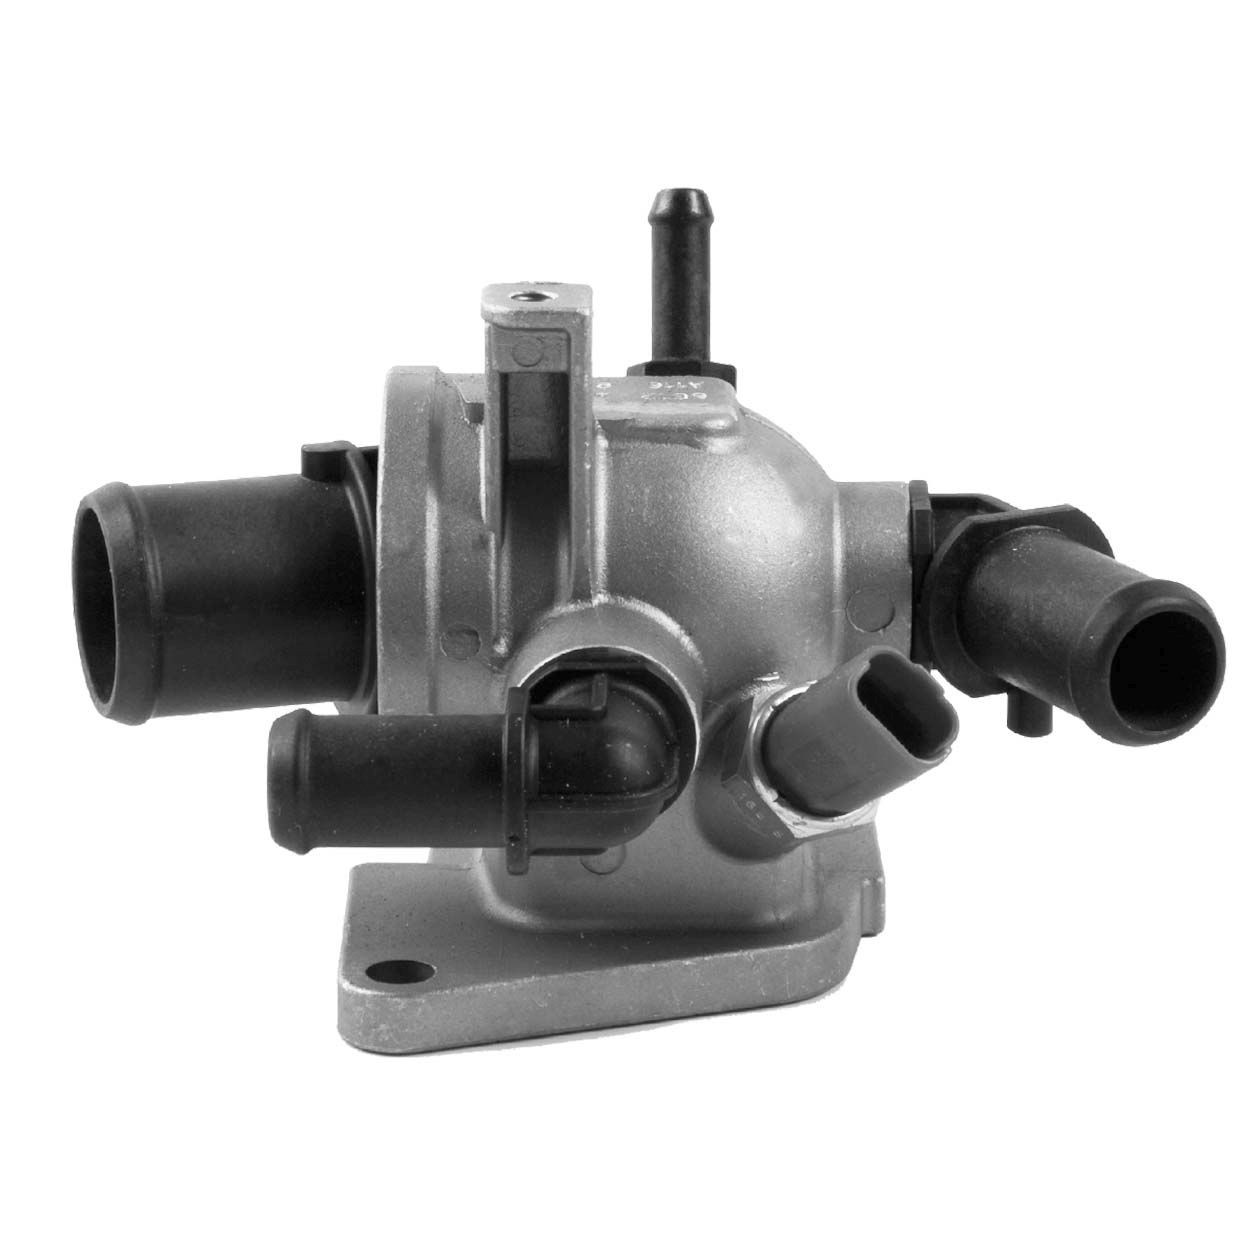 GATES TH38588G1 Engine thermostat Opening Temperature: 88°C, with gaskets/seals, with housing